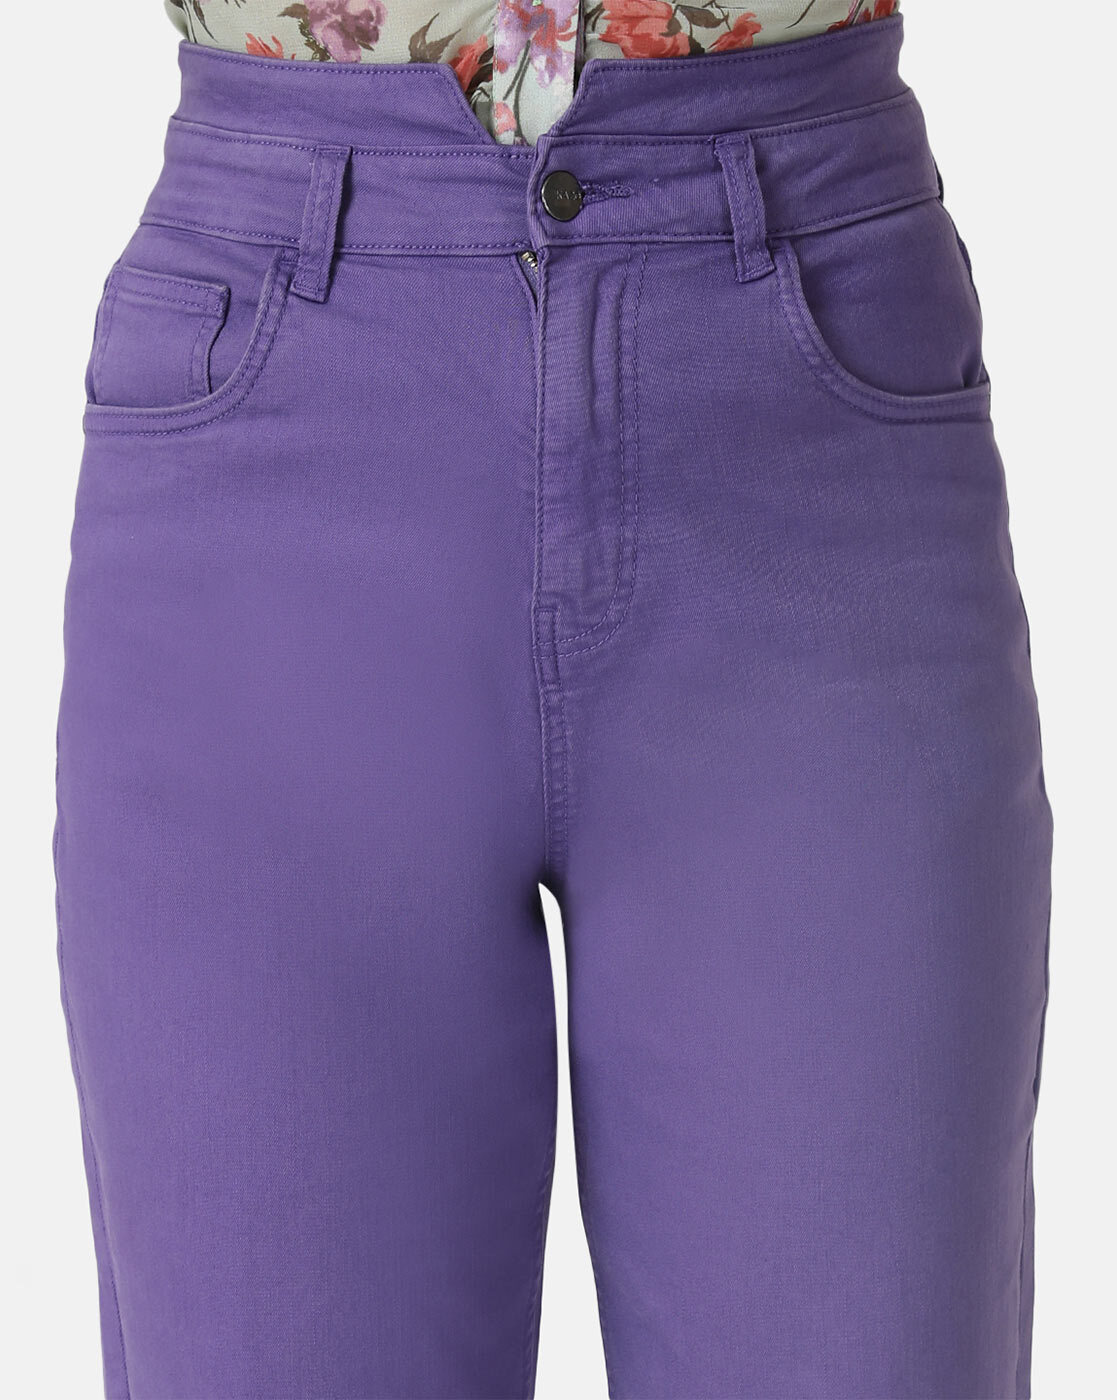 Purple Jeans - Buy Purple Jeans Online Starting at Just ₹237